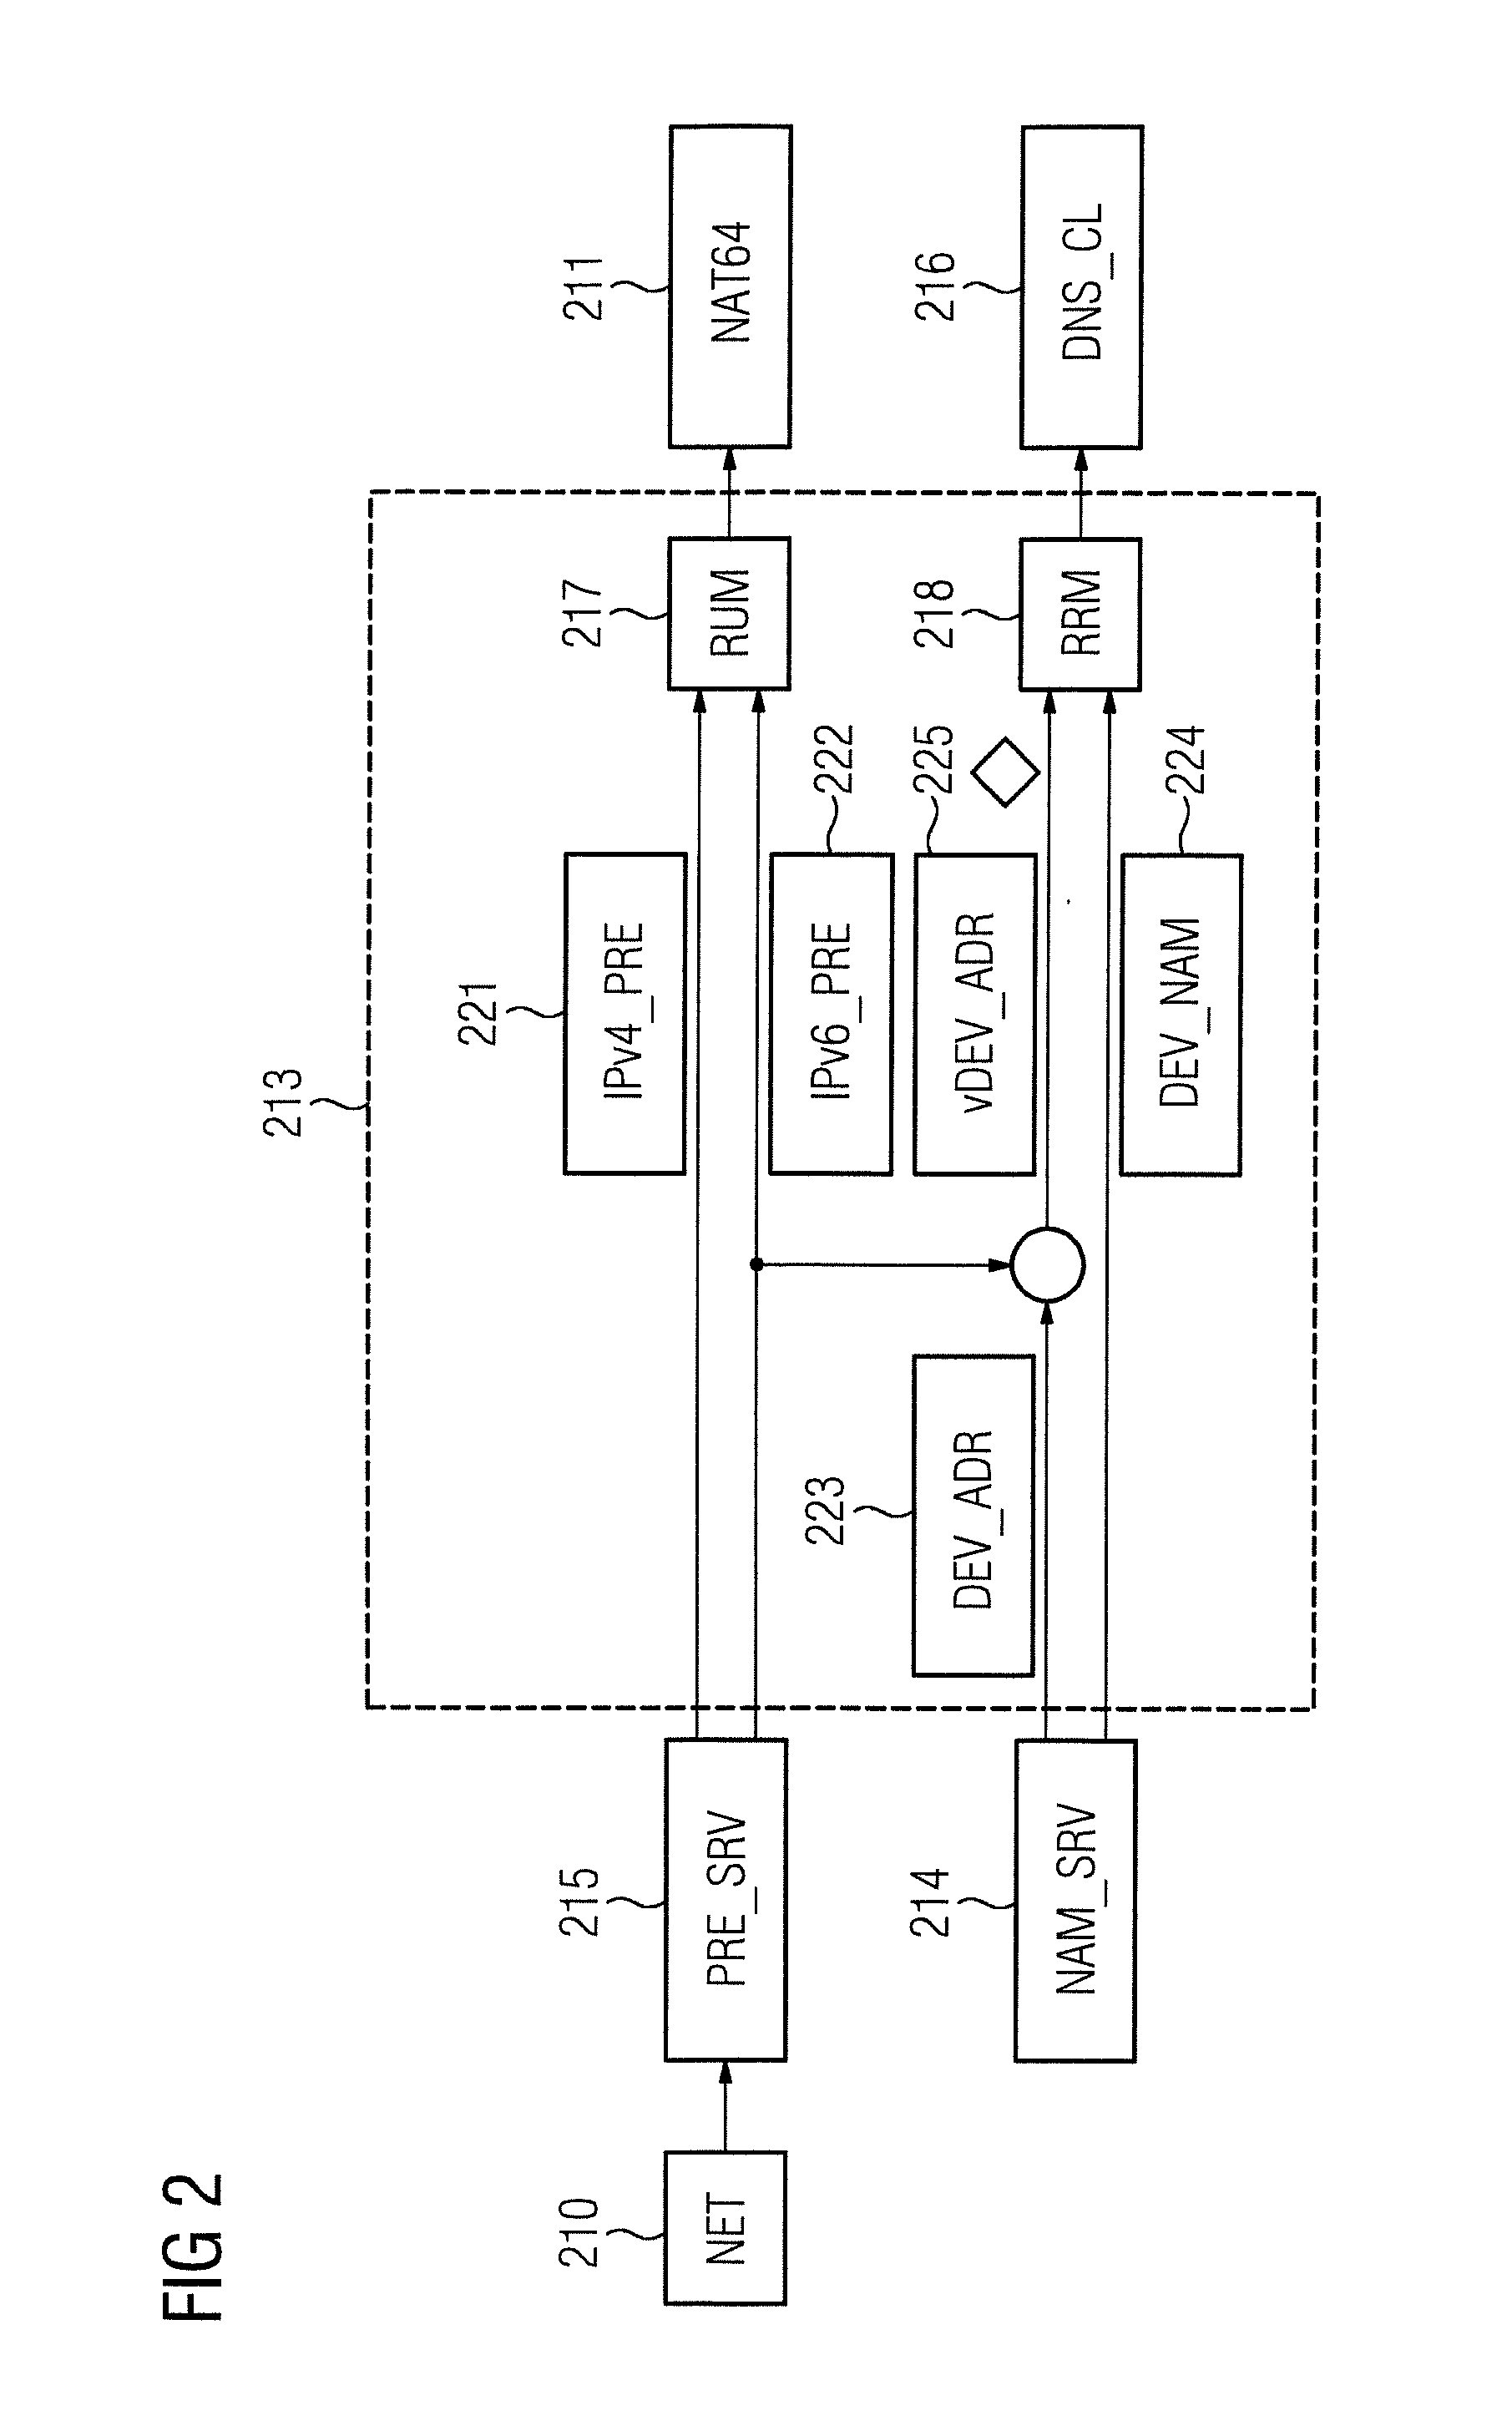 Communication Device and Method for Transmitting Data Within an Industrial Automation System